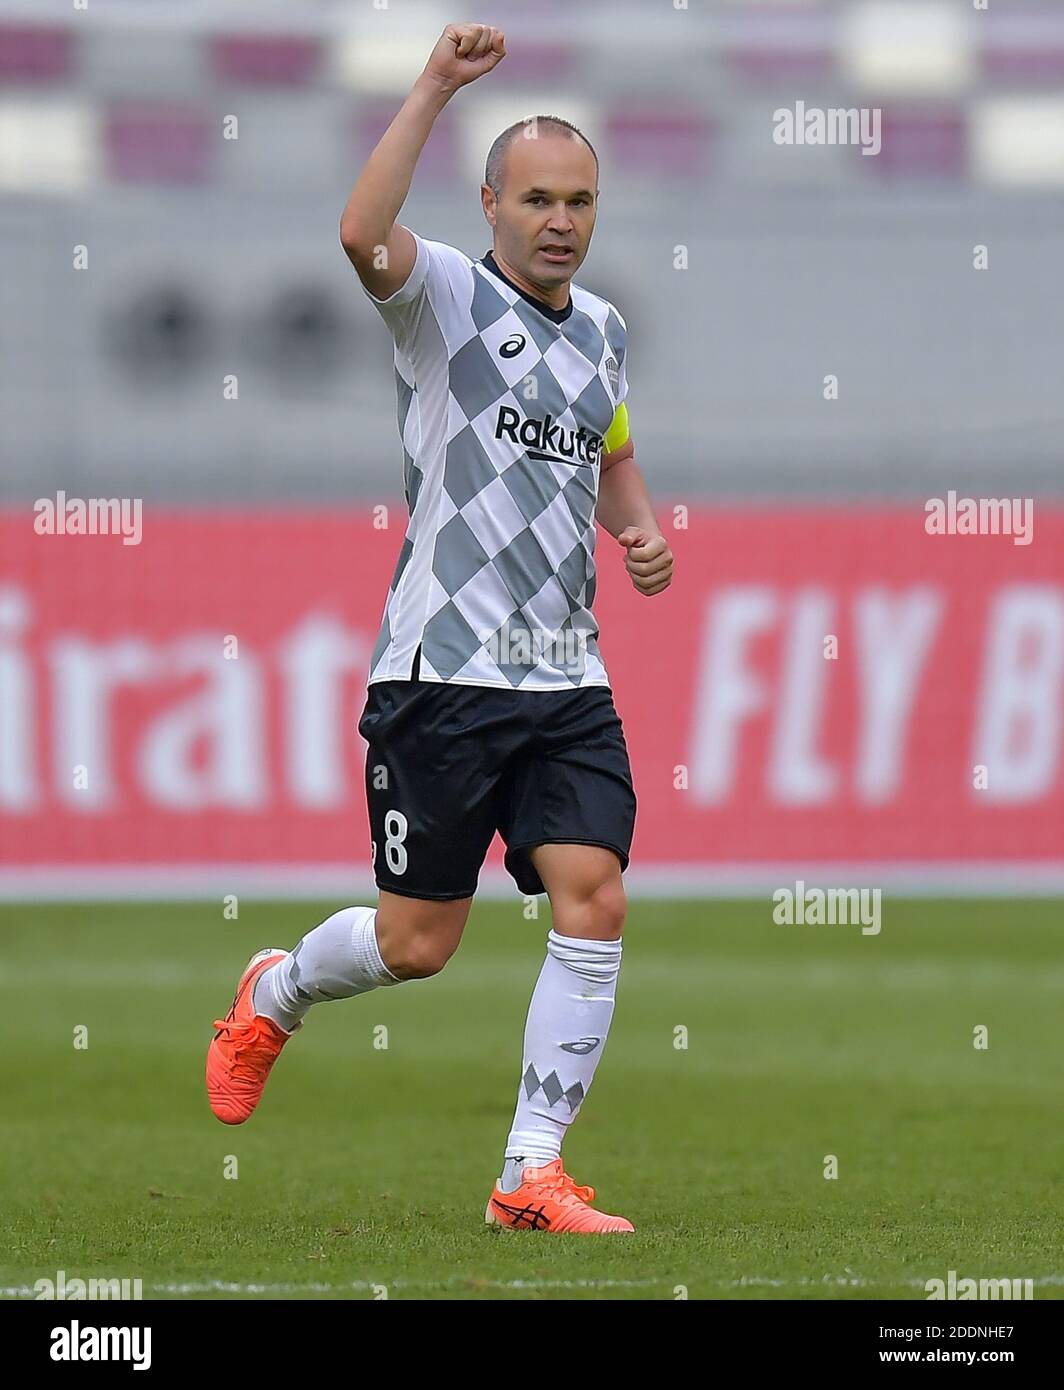 Doha, Qatar. 25th Nov, 2020. Andres Iniesta of Vissel Kobe celebrates his goal during the Group G match of the AFC Champions League between Guangzhou Evergrande FC and Vissel Kobe in Doha, Qatar, Nov. 25, 2020. Credit: Nikku/Xinhua/Alamy Live News Stock Photo